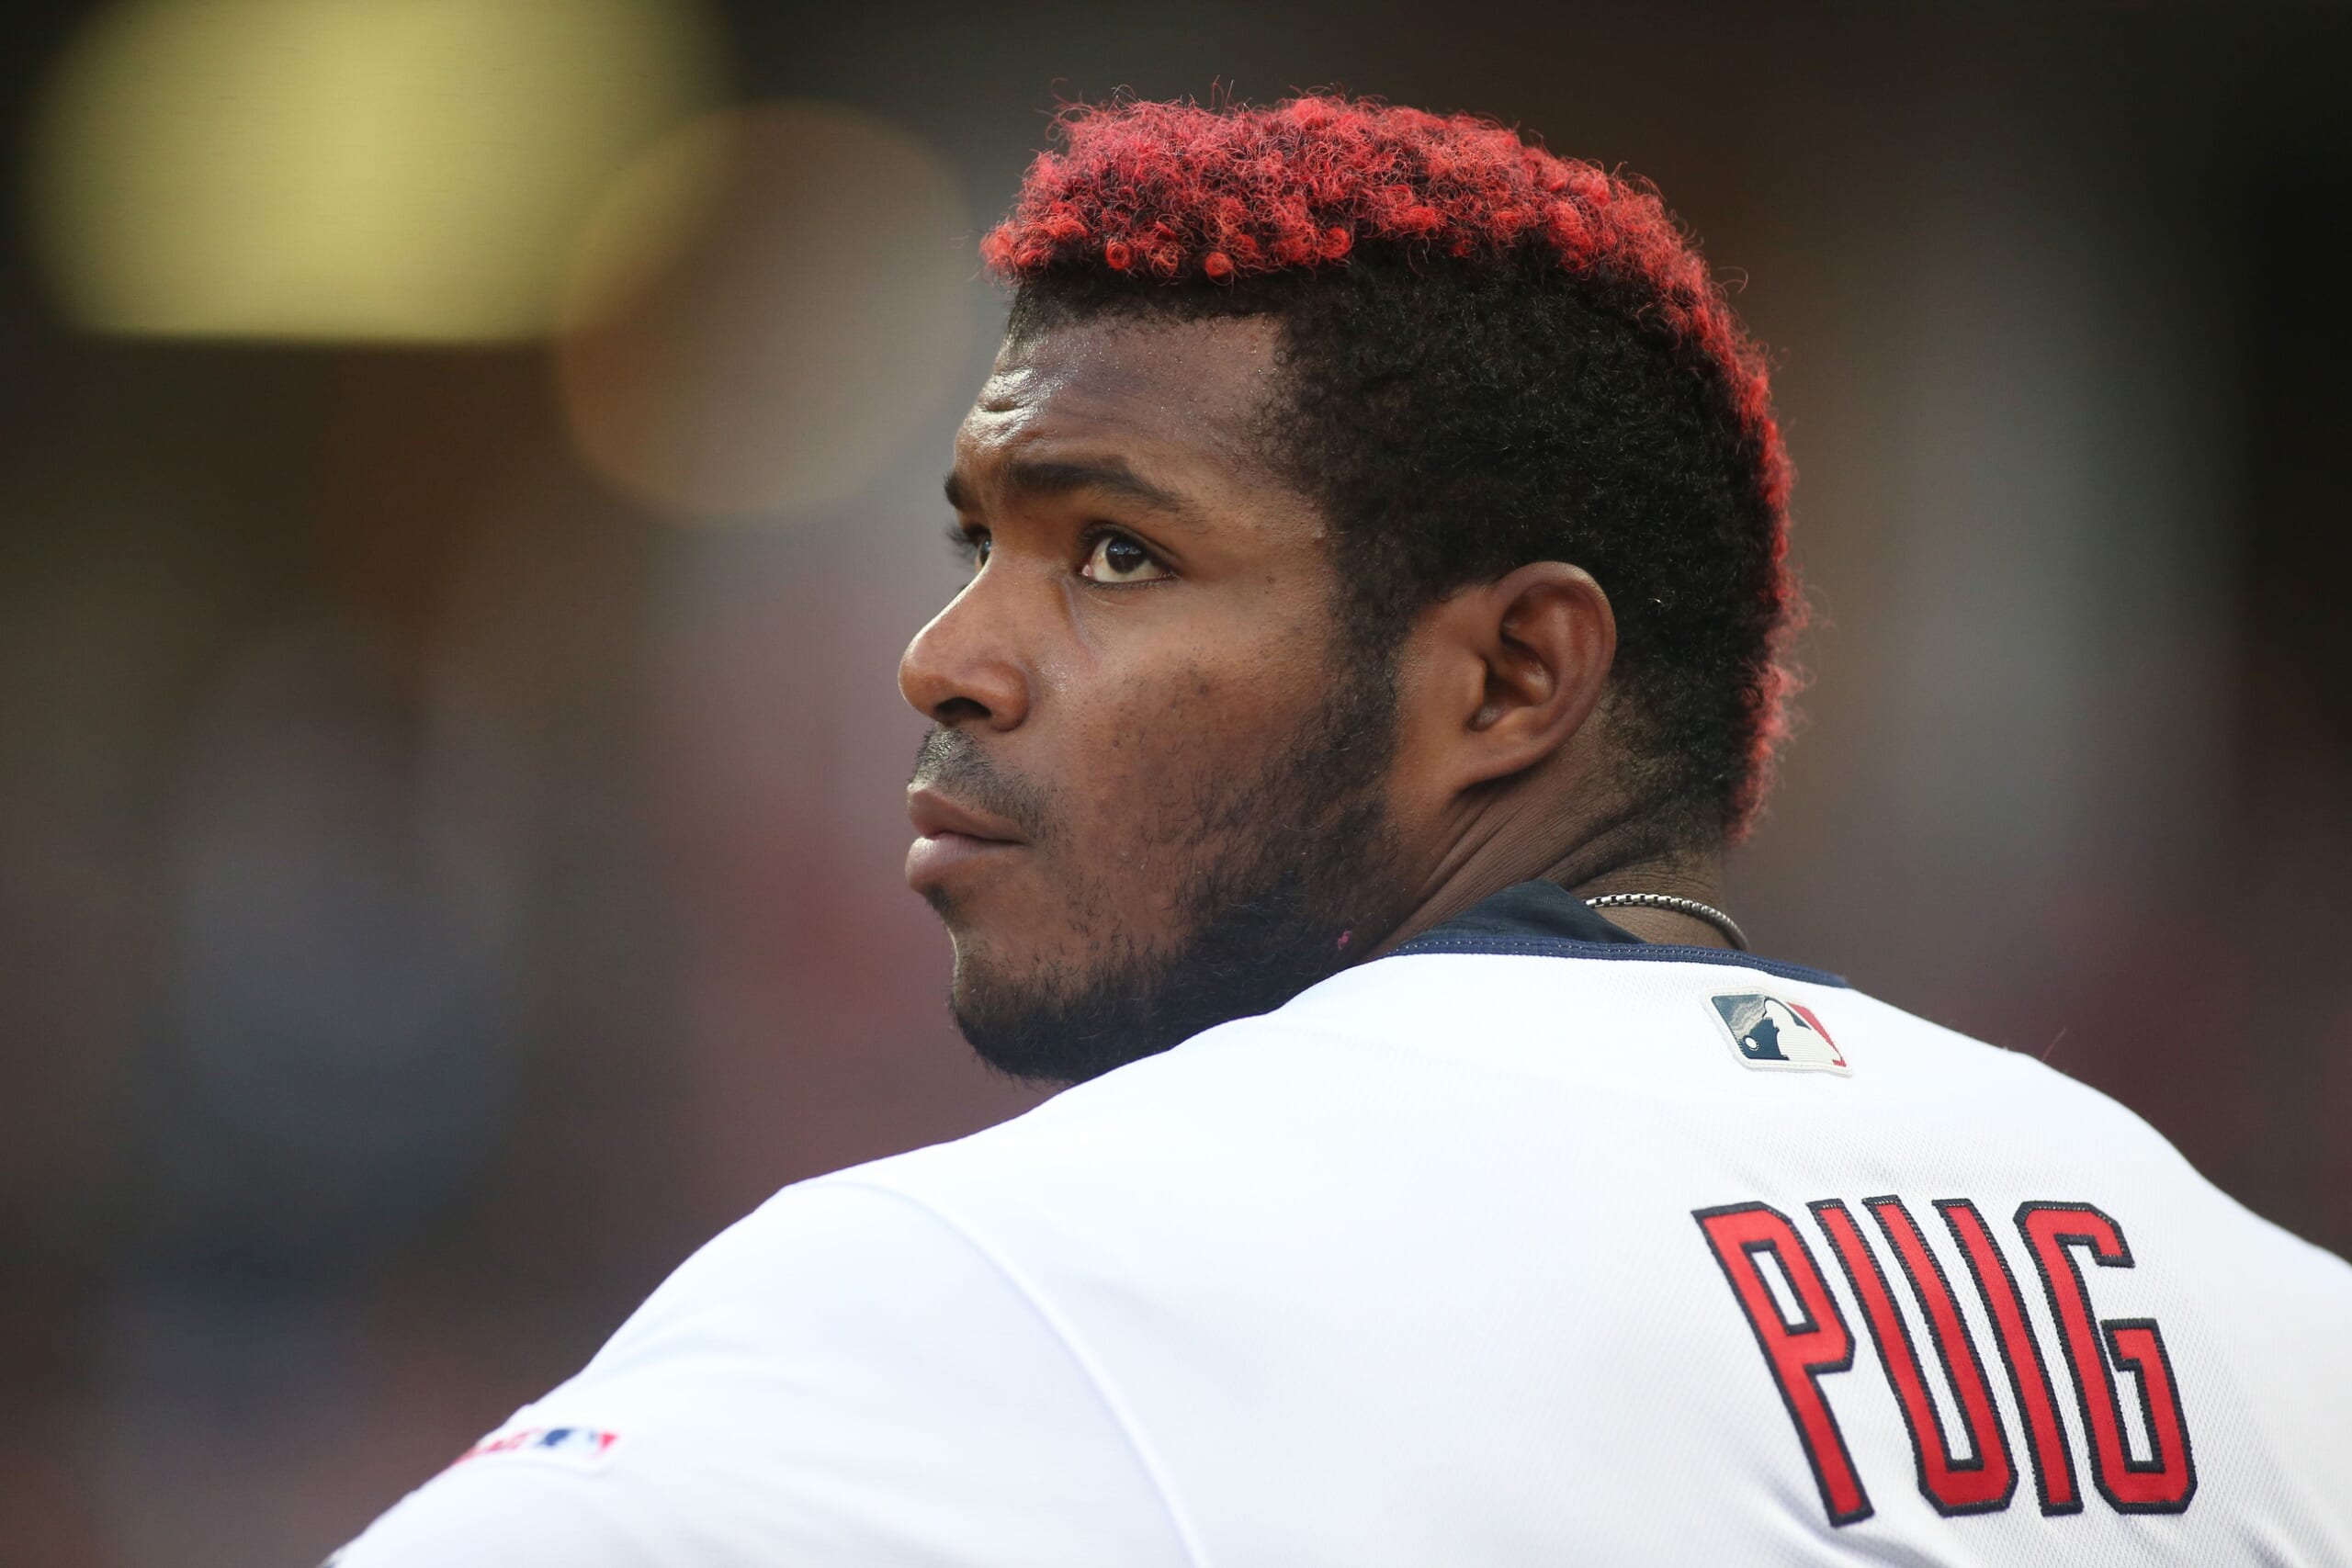 Ranking the Top MLB Landing Spots for Free-Agent OF Yasiel Puig Amid Rumors, News, Scores, Highlights, Stats, and Rumors